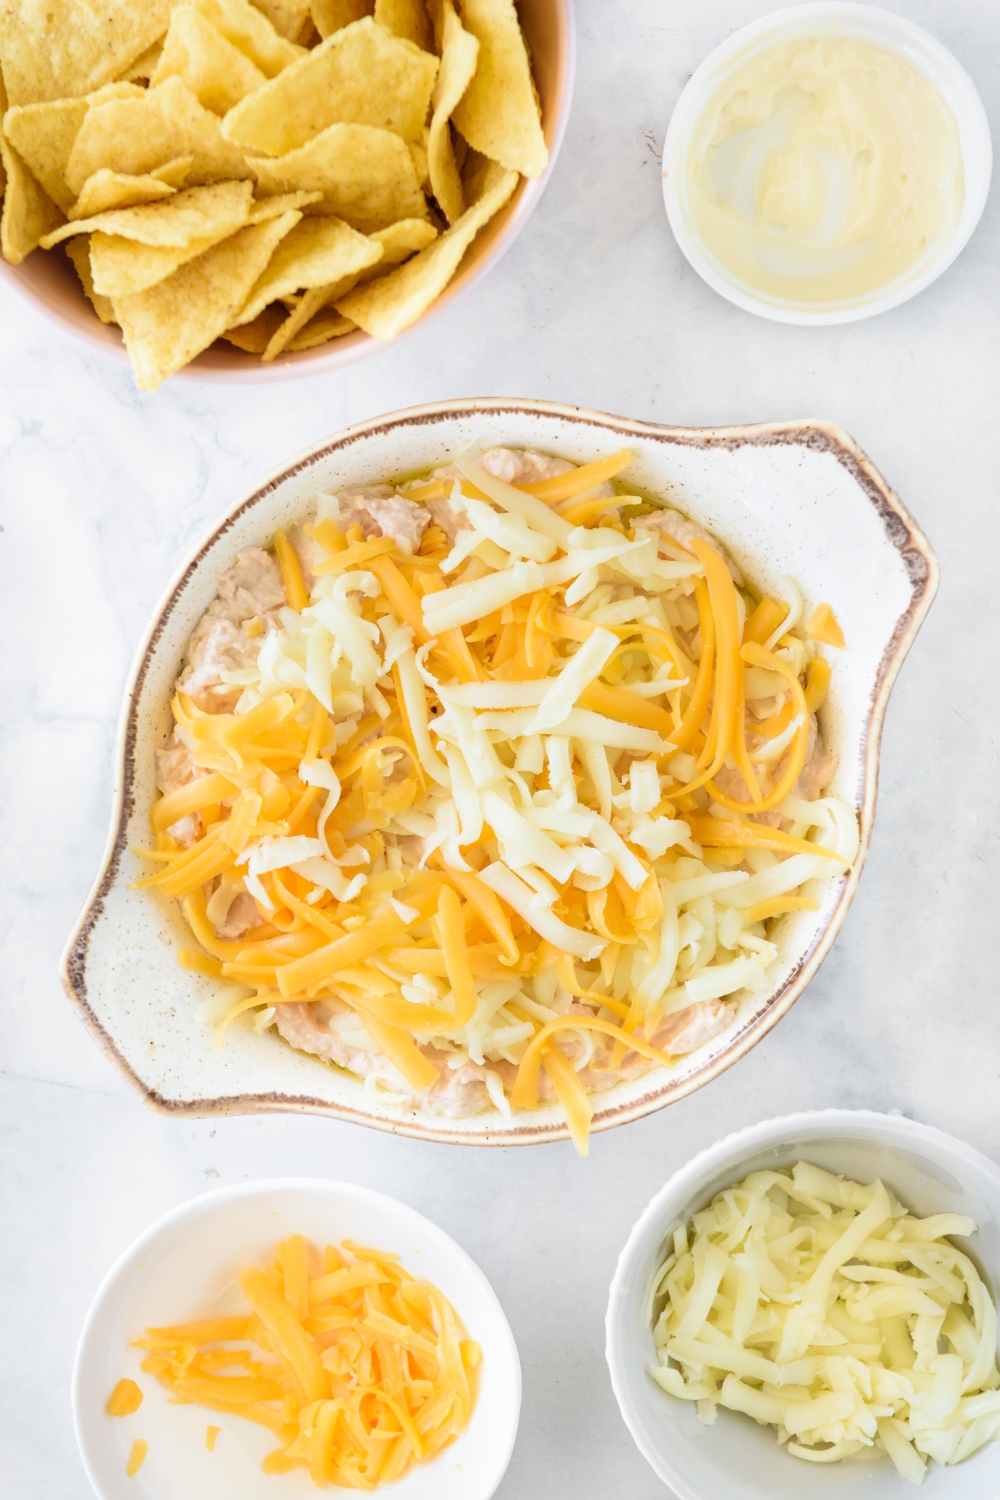 A baking dish filled with dip and covered in shredded cheese.